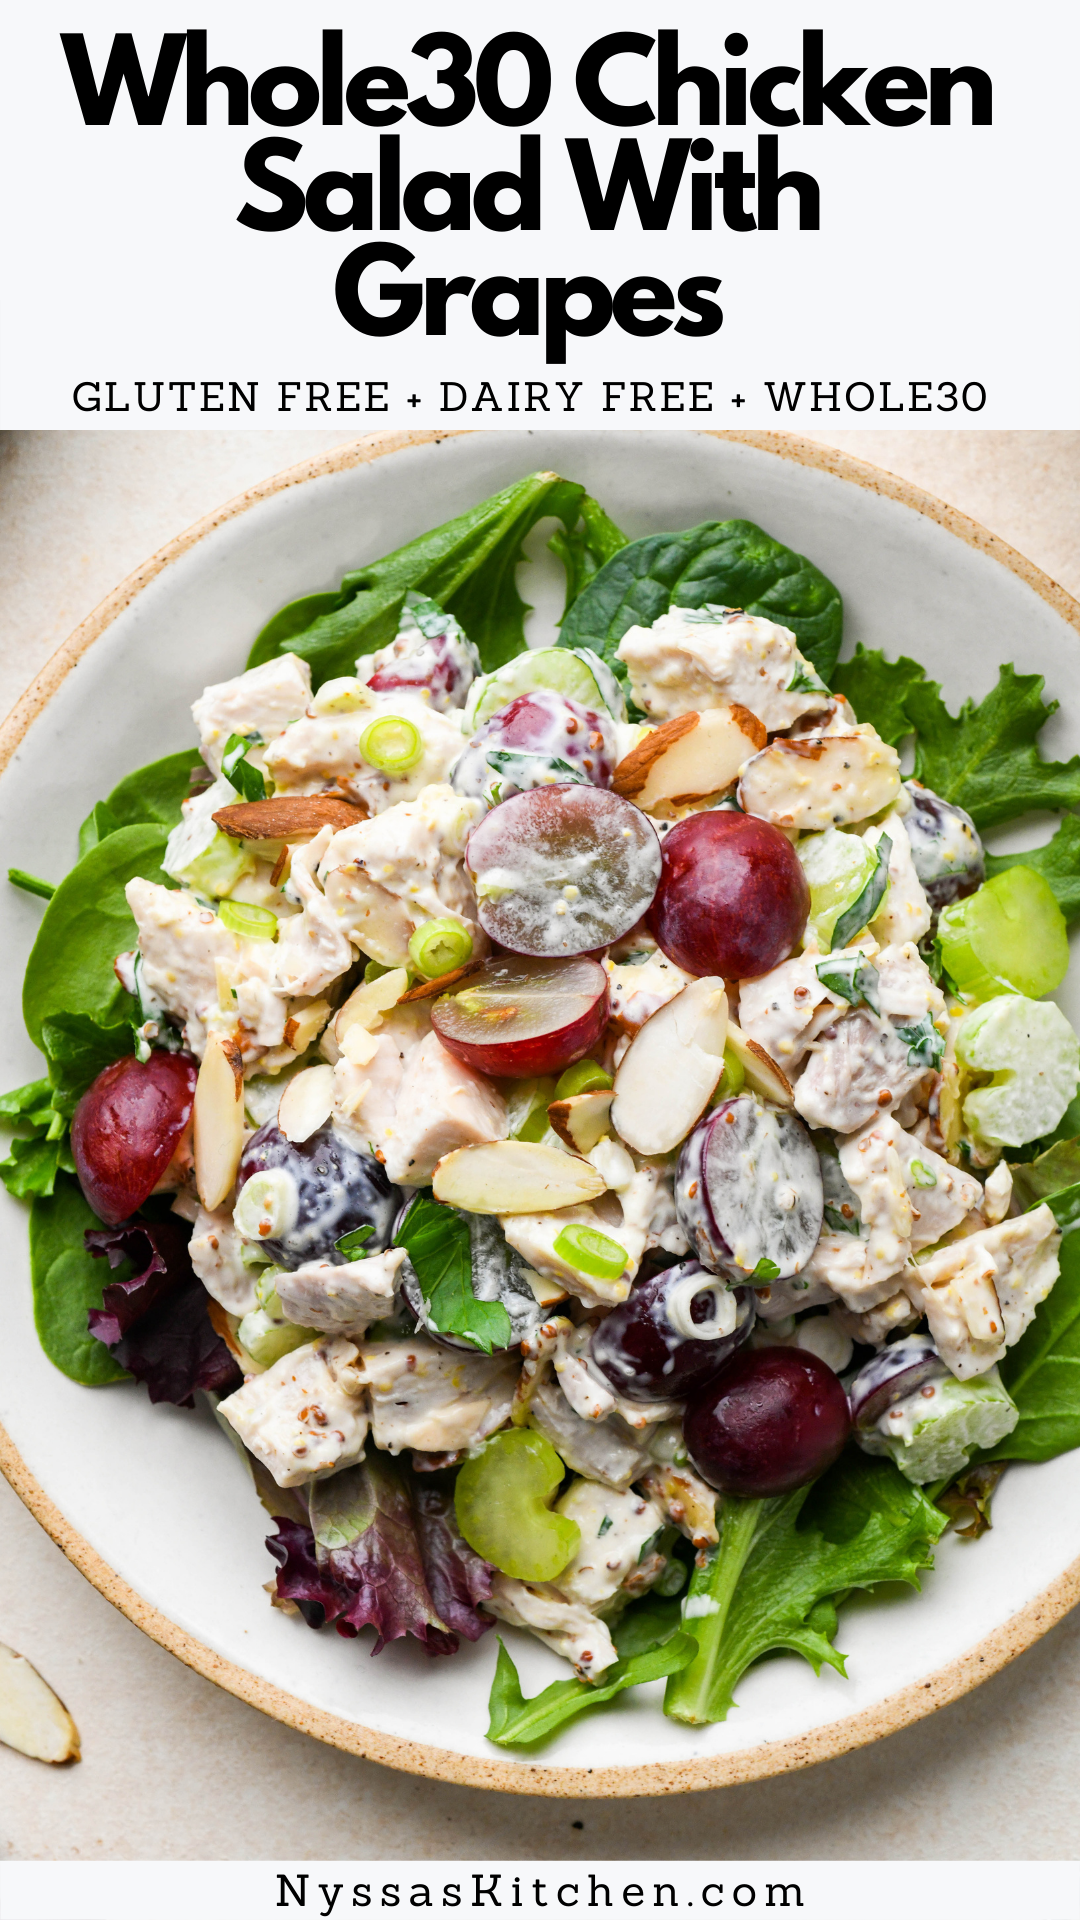 This easy chicken salad with grapes is the best meal prep recipe to make for a healthy week of lunches or to bring to a picnic! Made from scratch with just a handful of simple ingredients you probably already have in your pantry. Whole30, gluten free, dairy free.